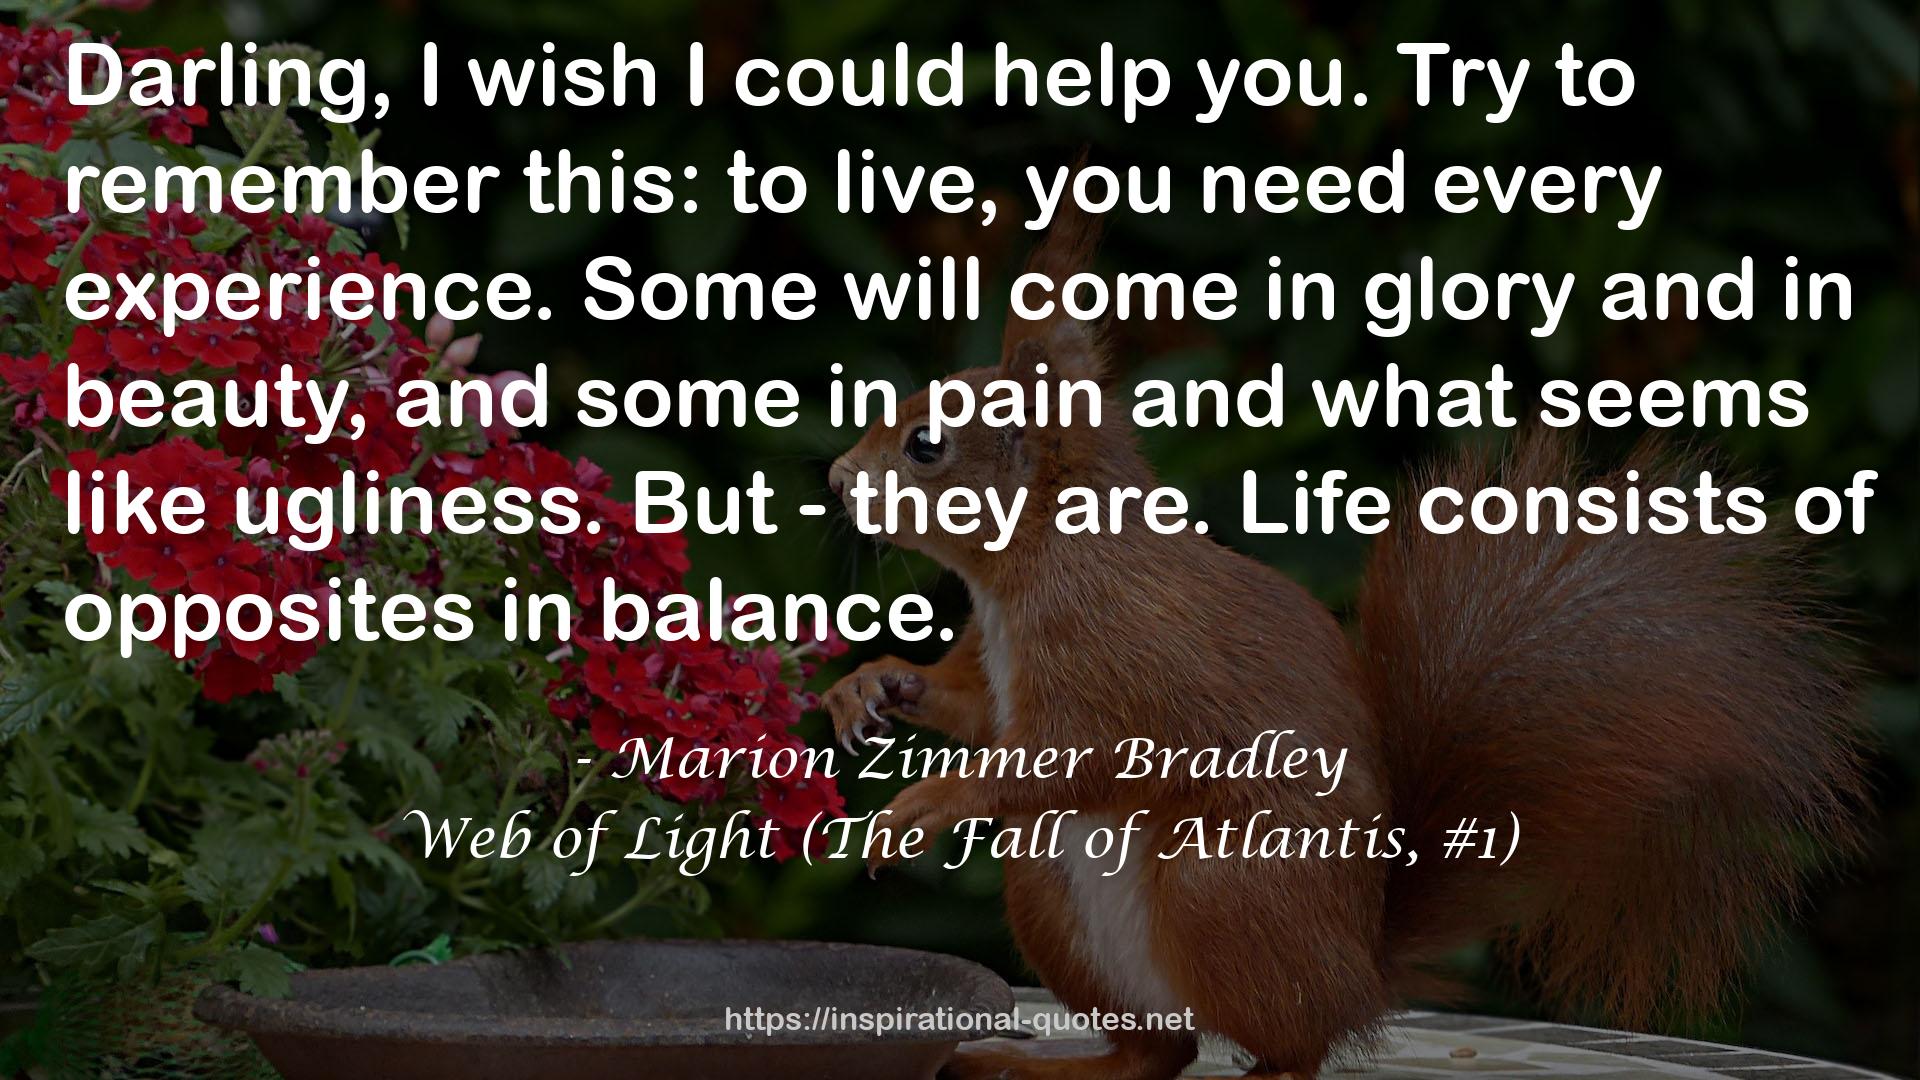 Web of Light (The Fall of Atlantis, #1) QUOTES